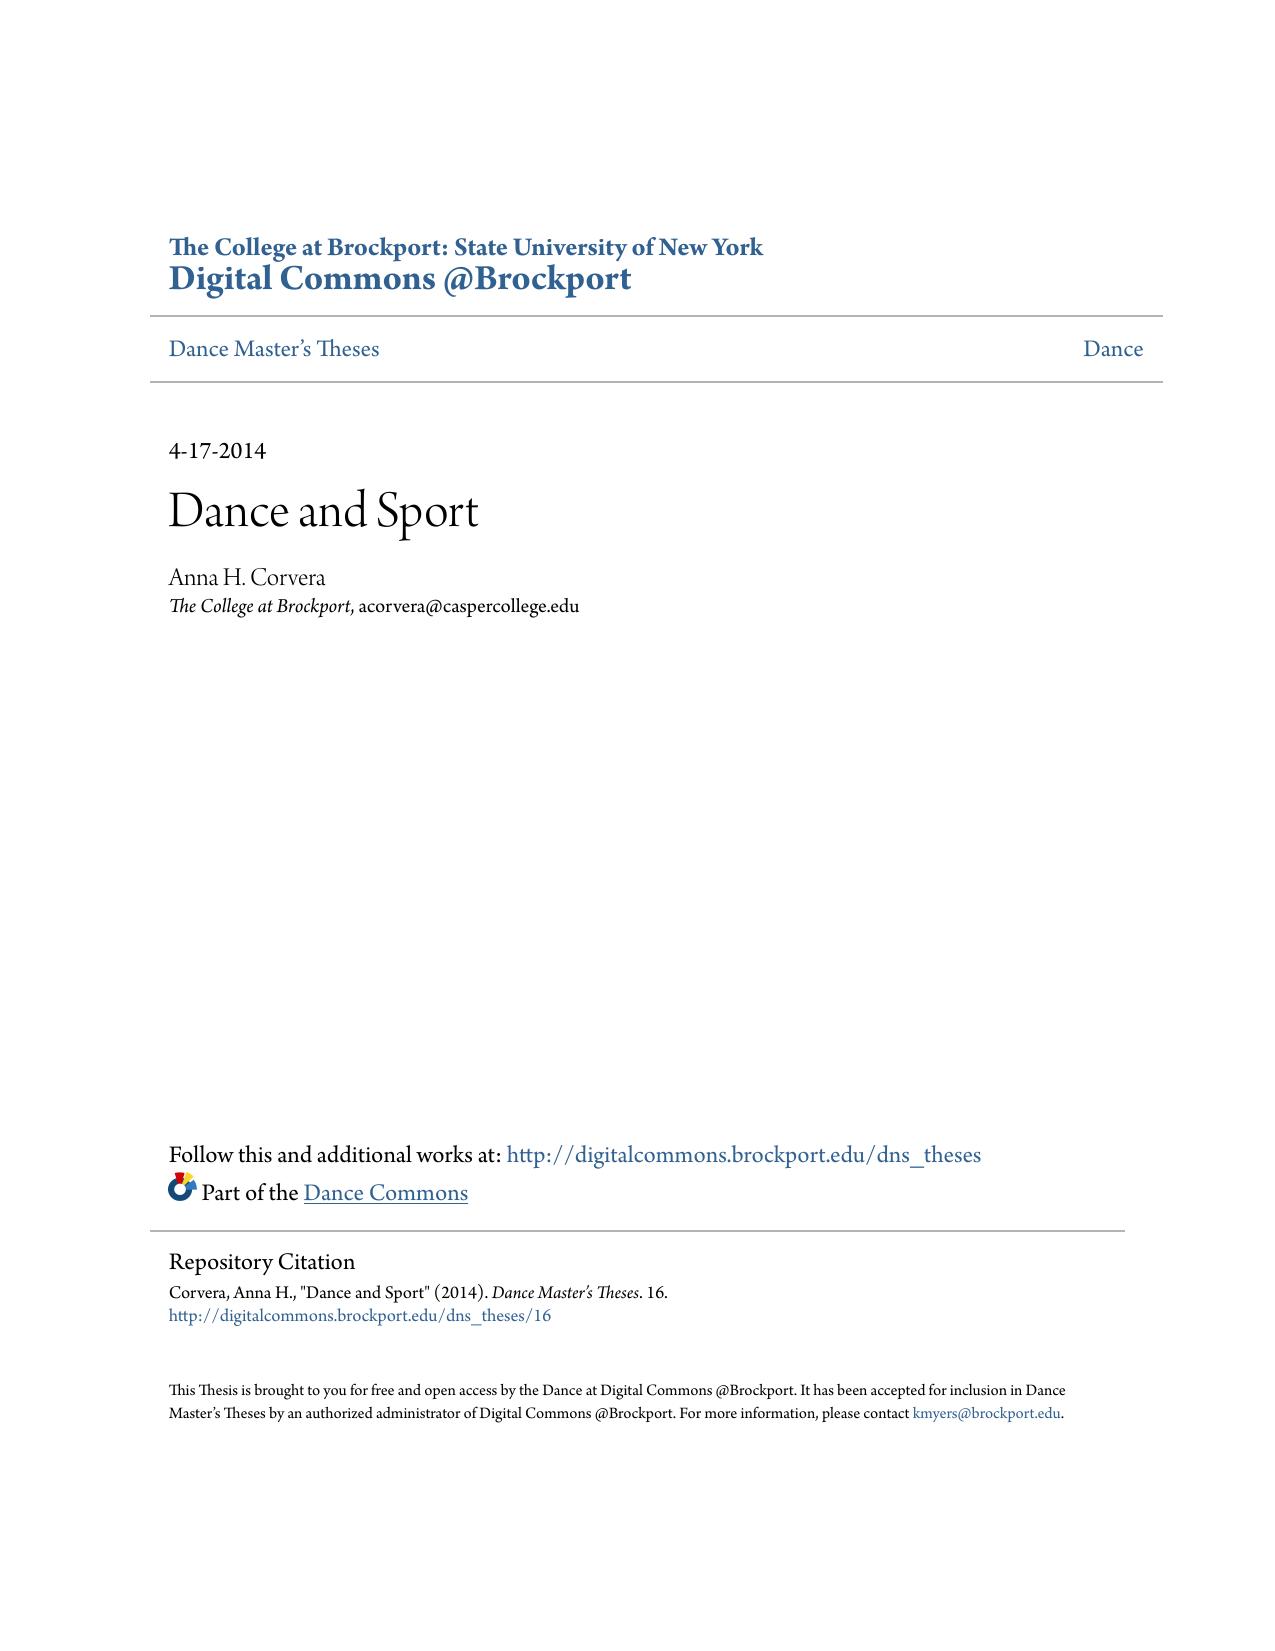 Dance and Sport